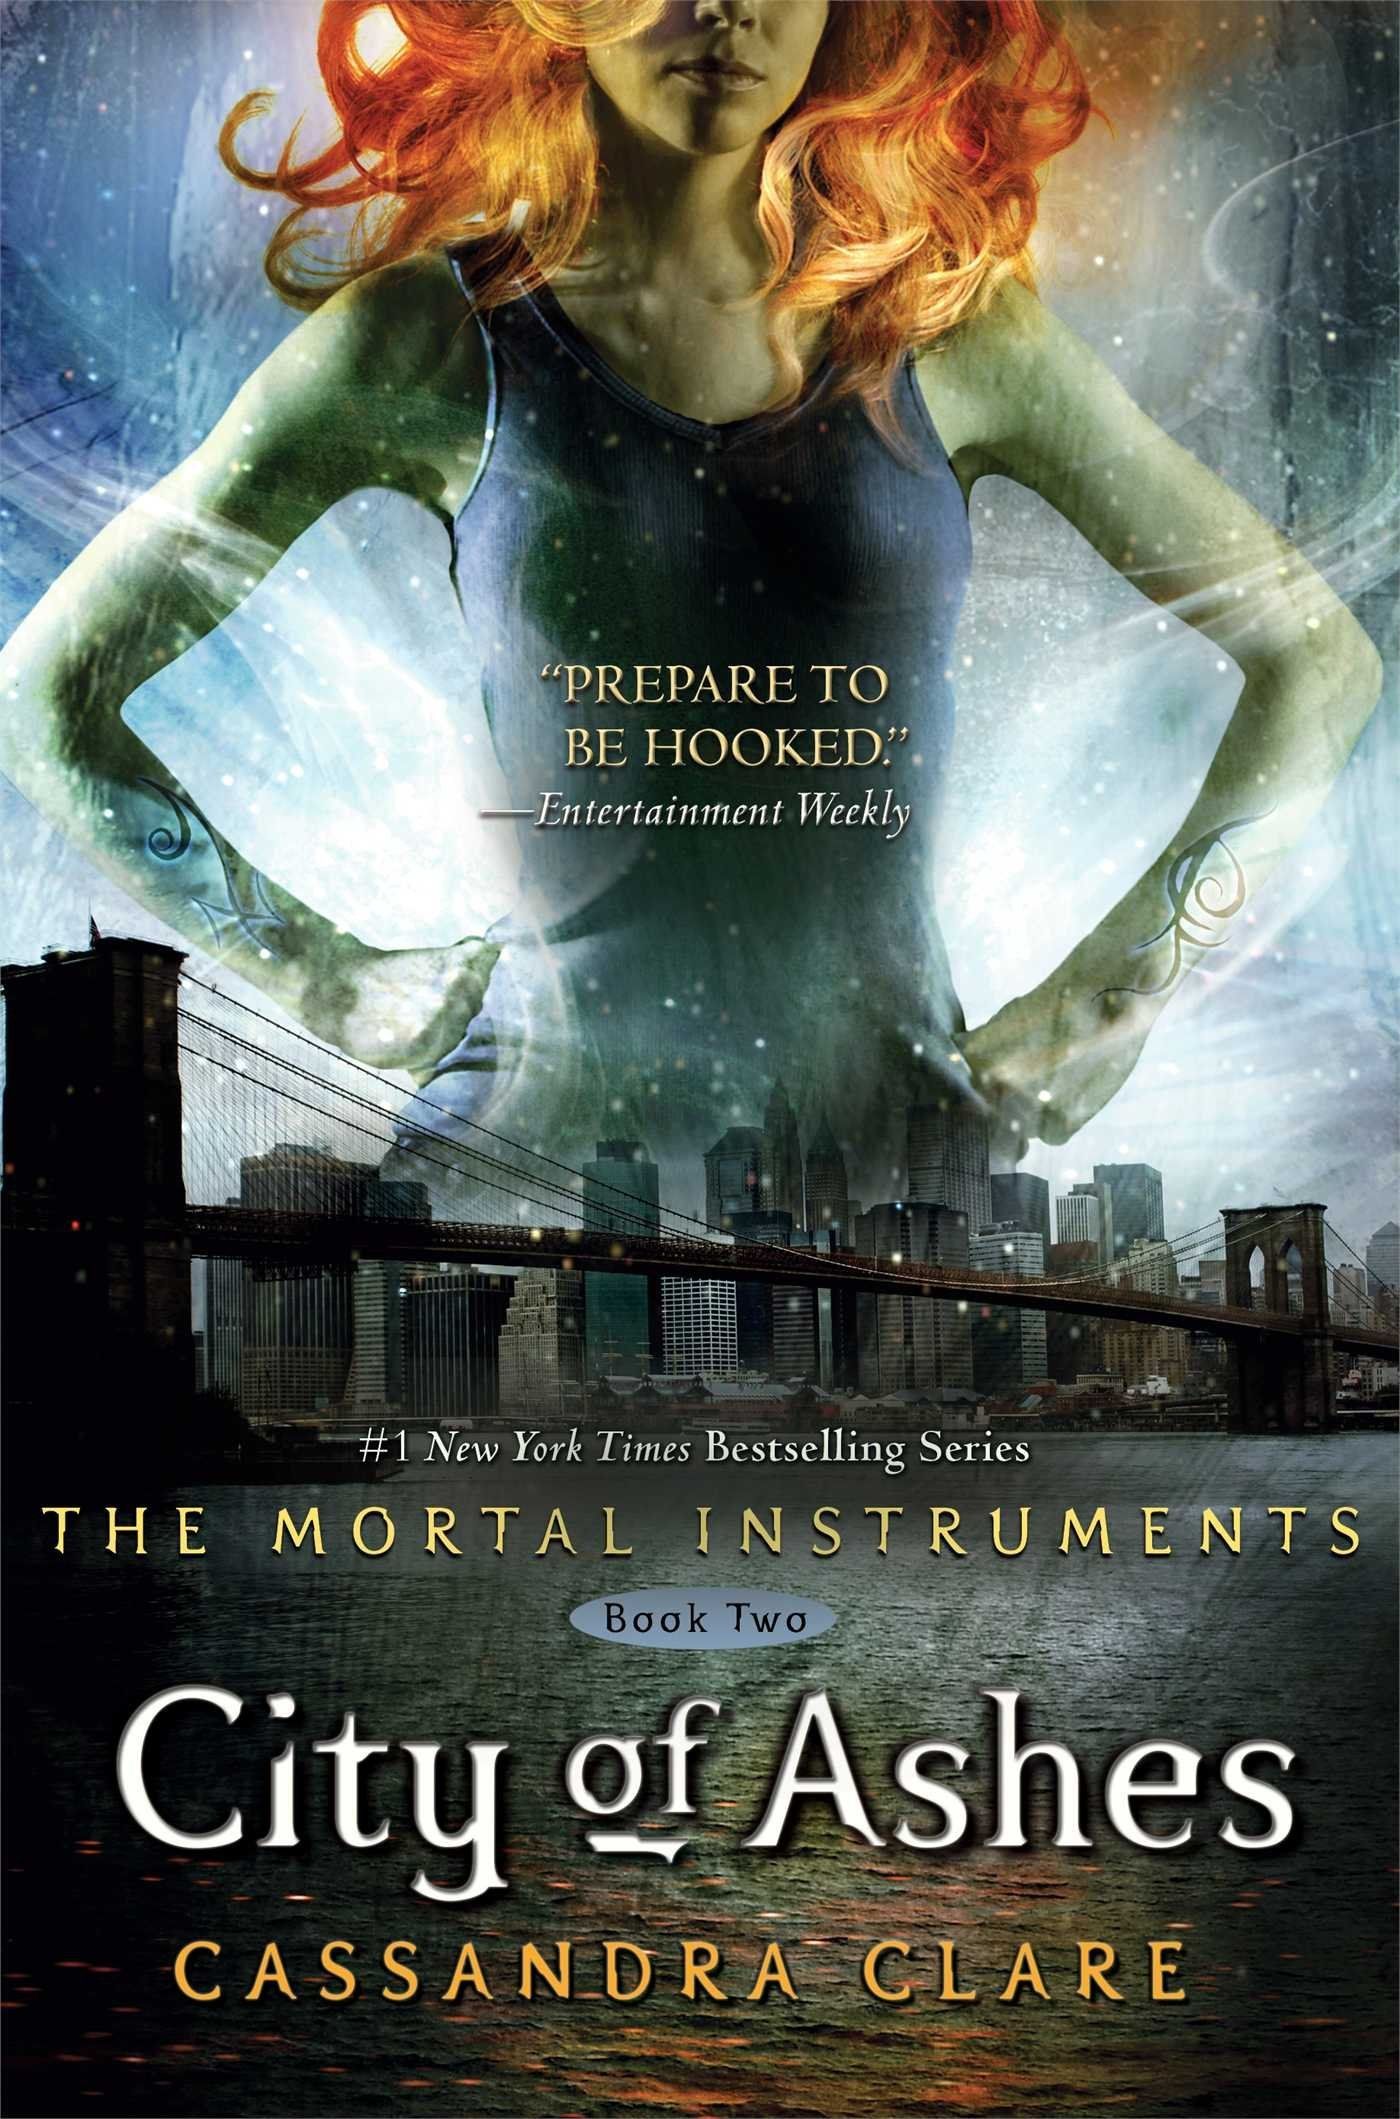 Download City of Ashes PDF by Cassandra Clare